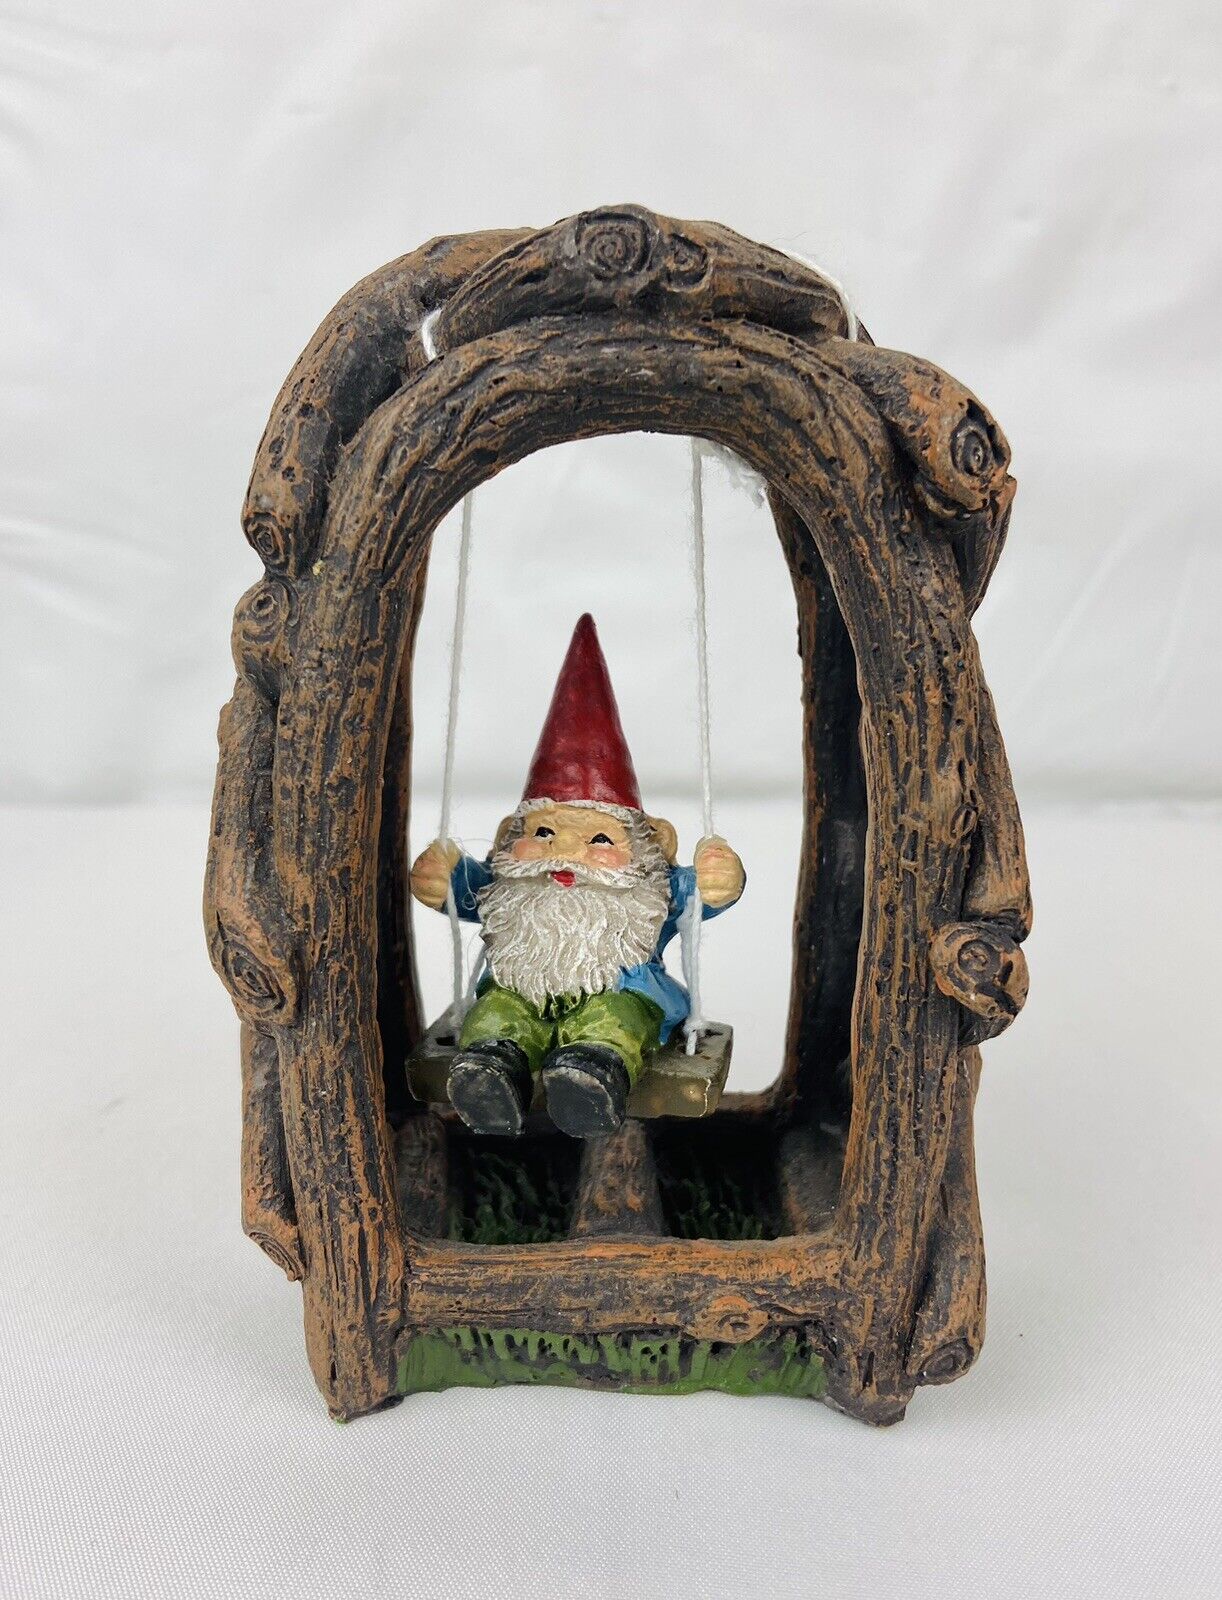 5” Gnome Twisted Tree Arch Swing Figurine Fairy Garden The Bloom Room Littles